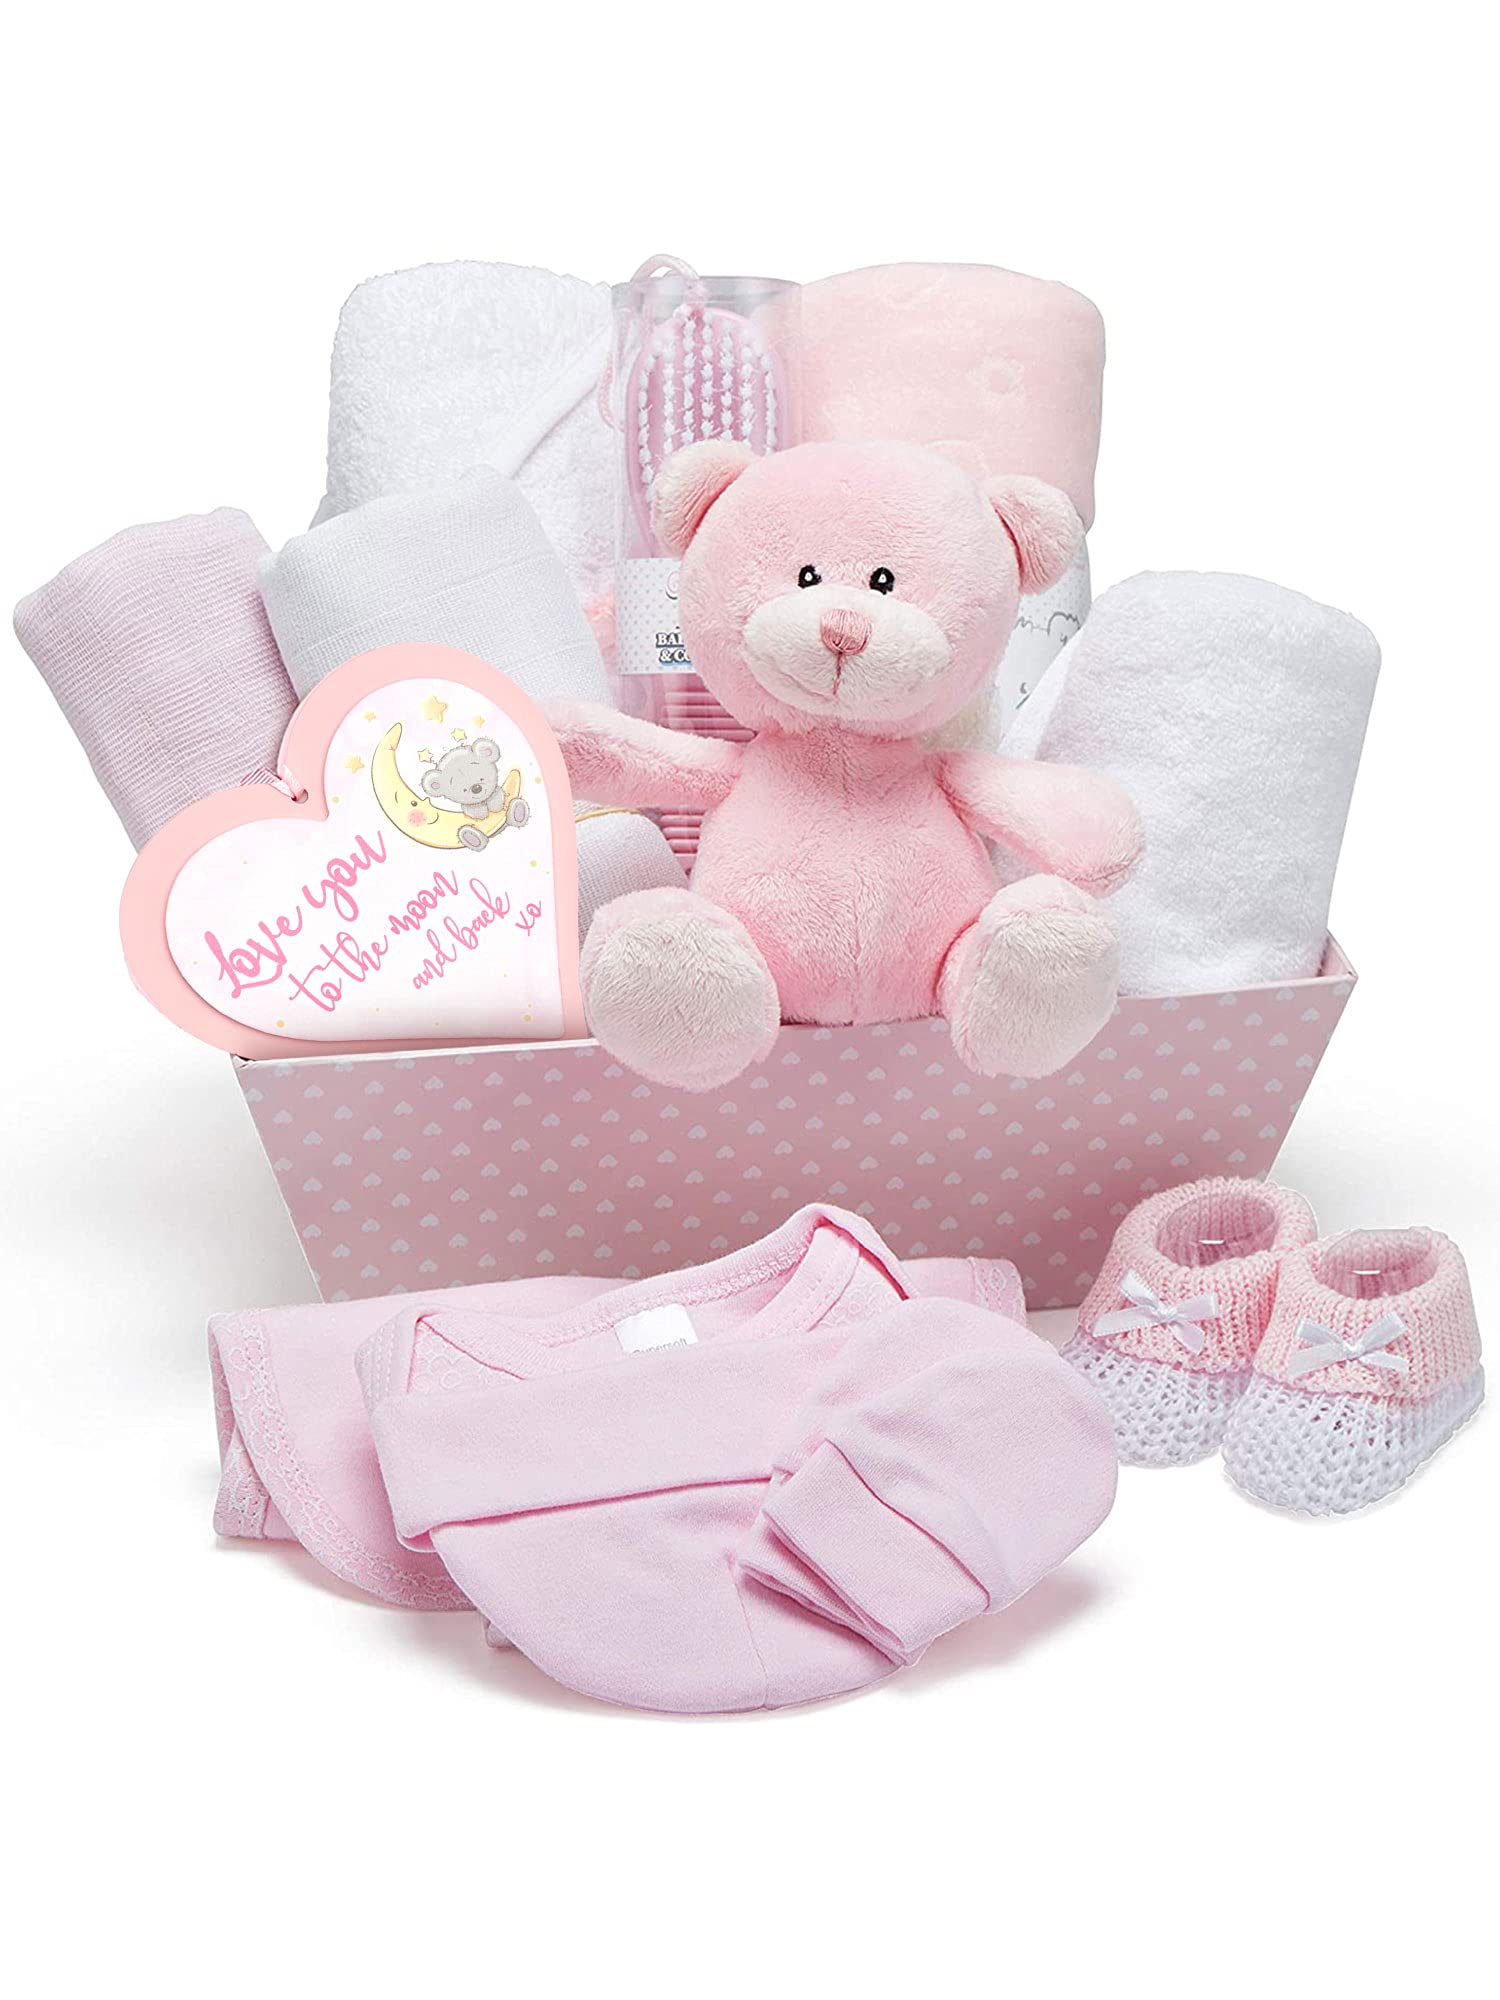 Newborn Baby Girl Keepsake Box - Pink, Hand Packed and Wrapped in Chiffon this Hamper includes a Cute Teddy Bear, Knitted Booties, Bodysuit, Bib, Hat, Blanket, Hooded Towel and Hanging Plaque